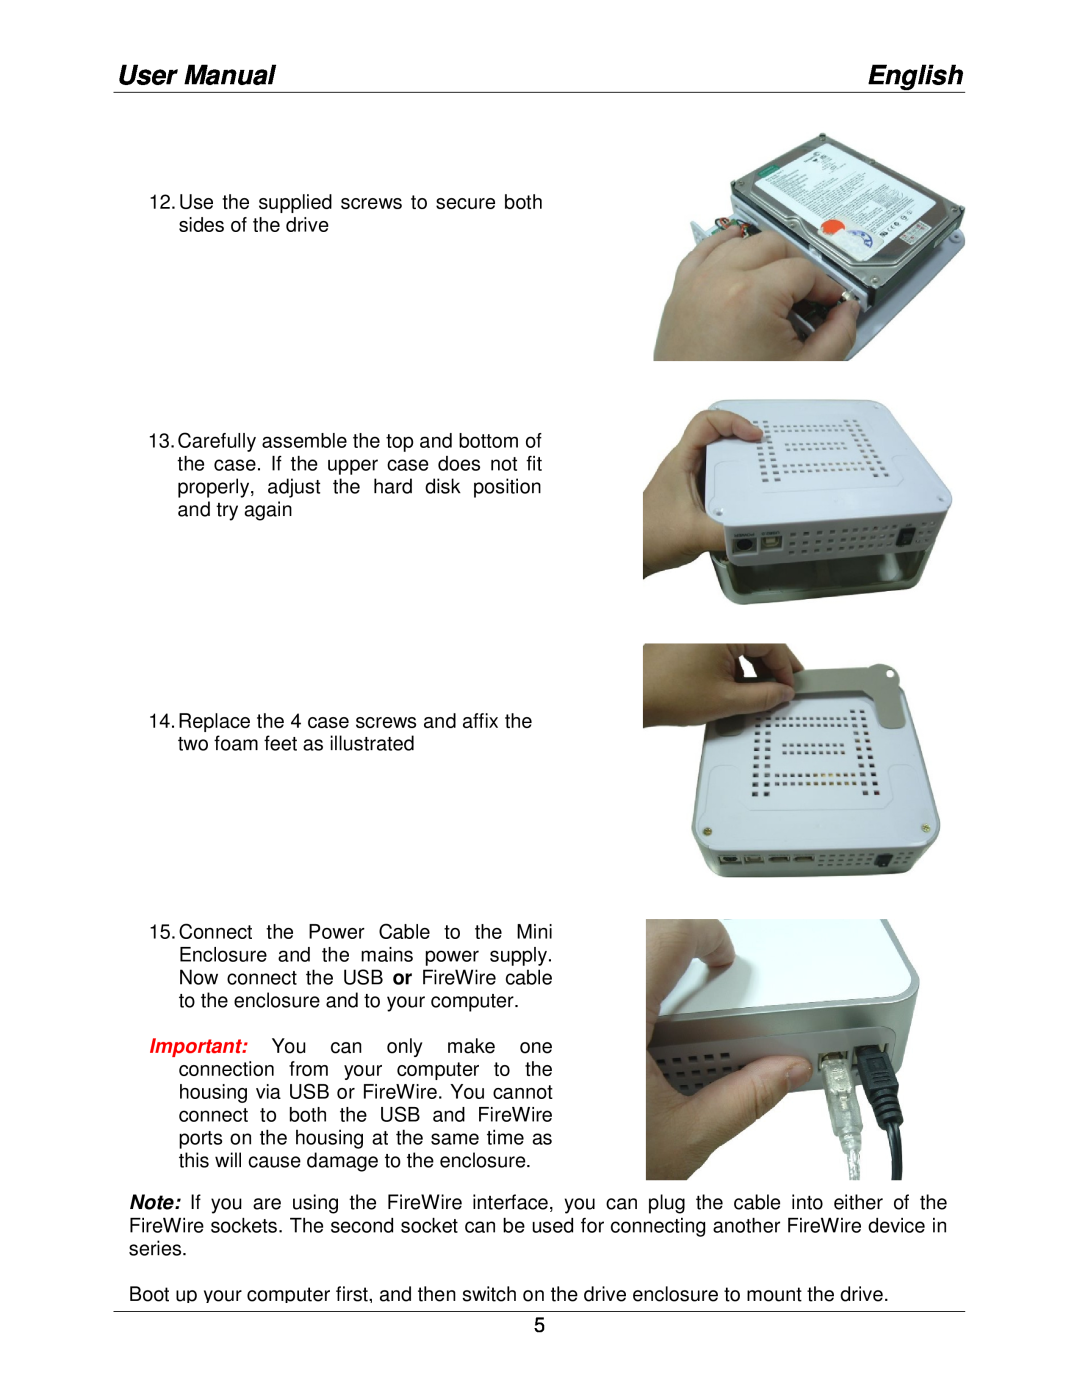 Lindy 42807v0 user manual User Manual, English, Use the supplied screws to secure both sides of the drive 